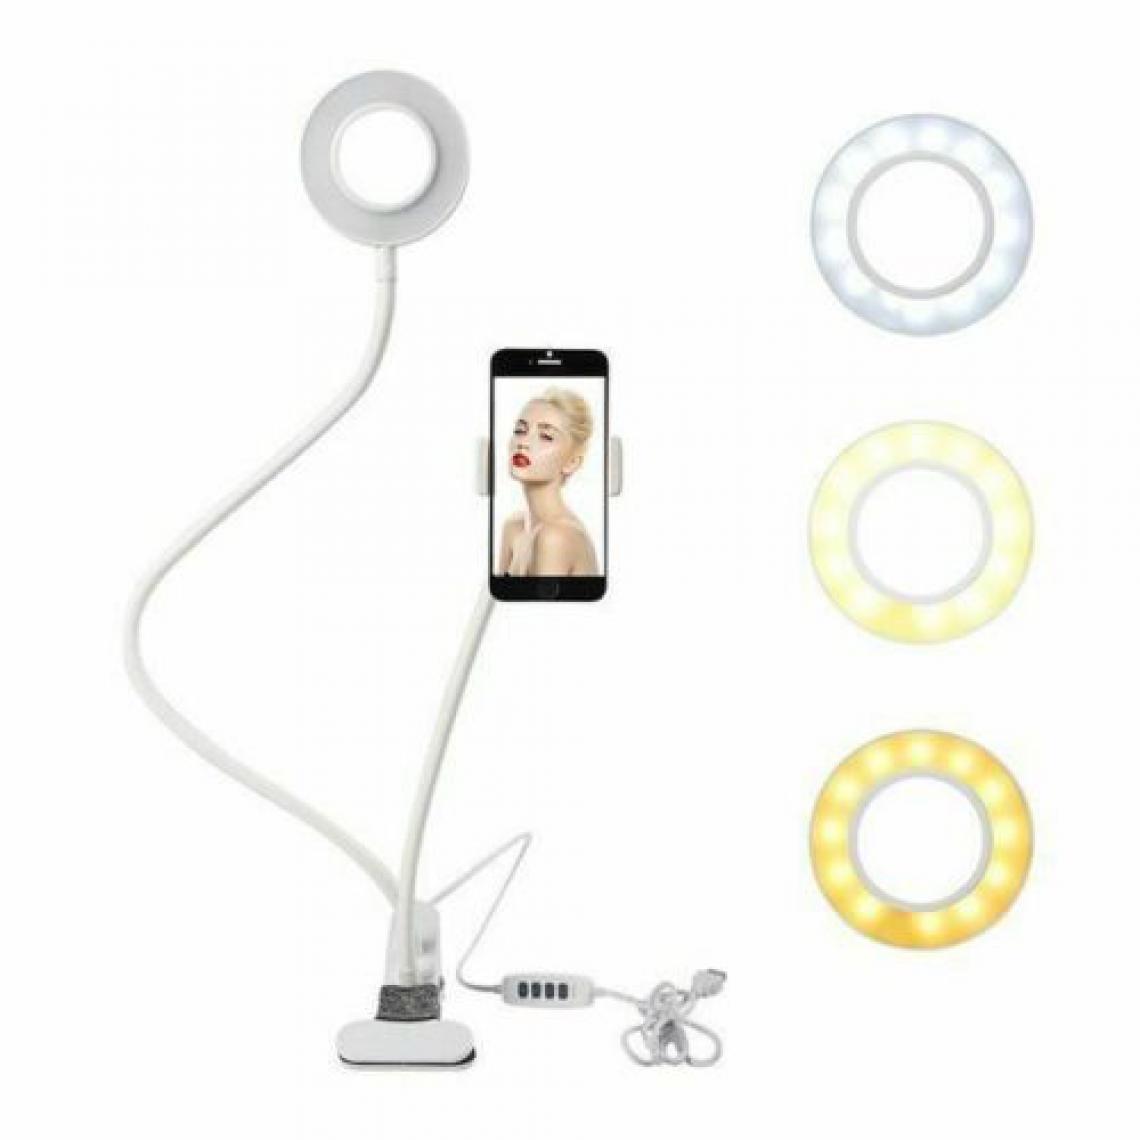 Ozzzo - Stand support bureau selfie led ozzzo blanc pour Huawei P20 Lite 2019 - Station d'accueil smartphone